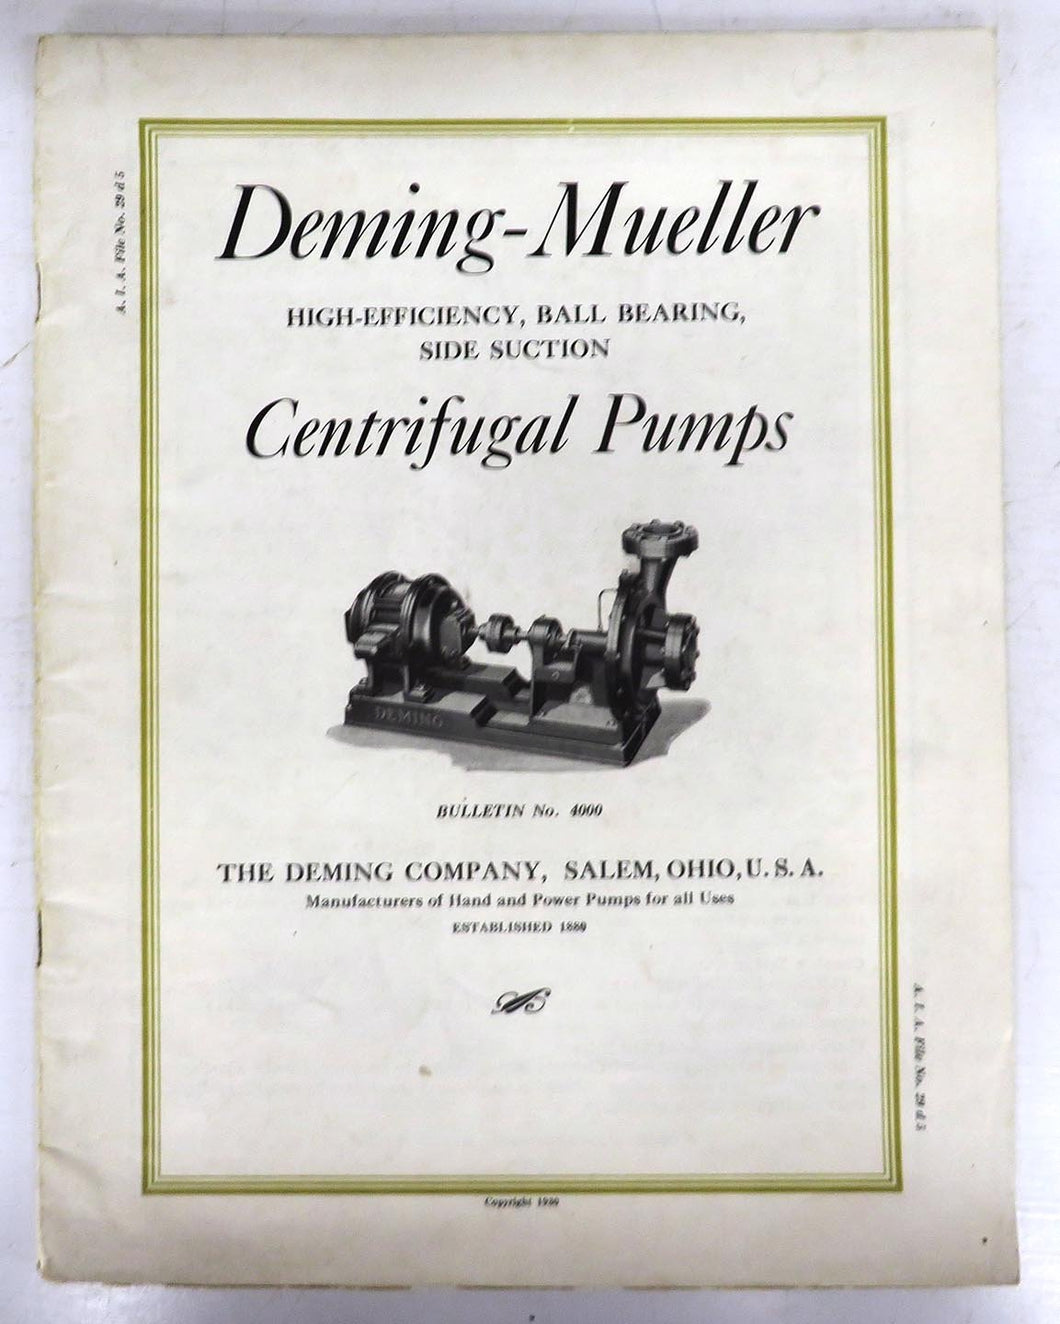 Deming-Mueller High-Efficiency, Ball Bearing, Side Suction Centrifugal Pumps catalogue